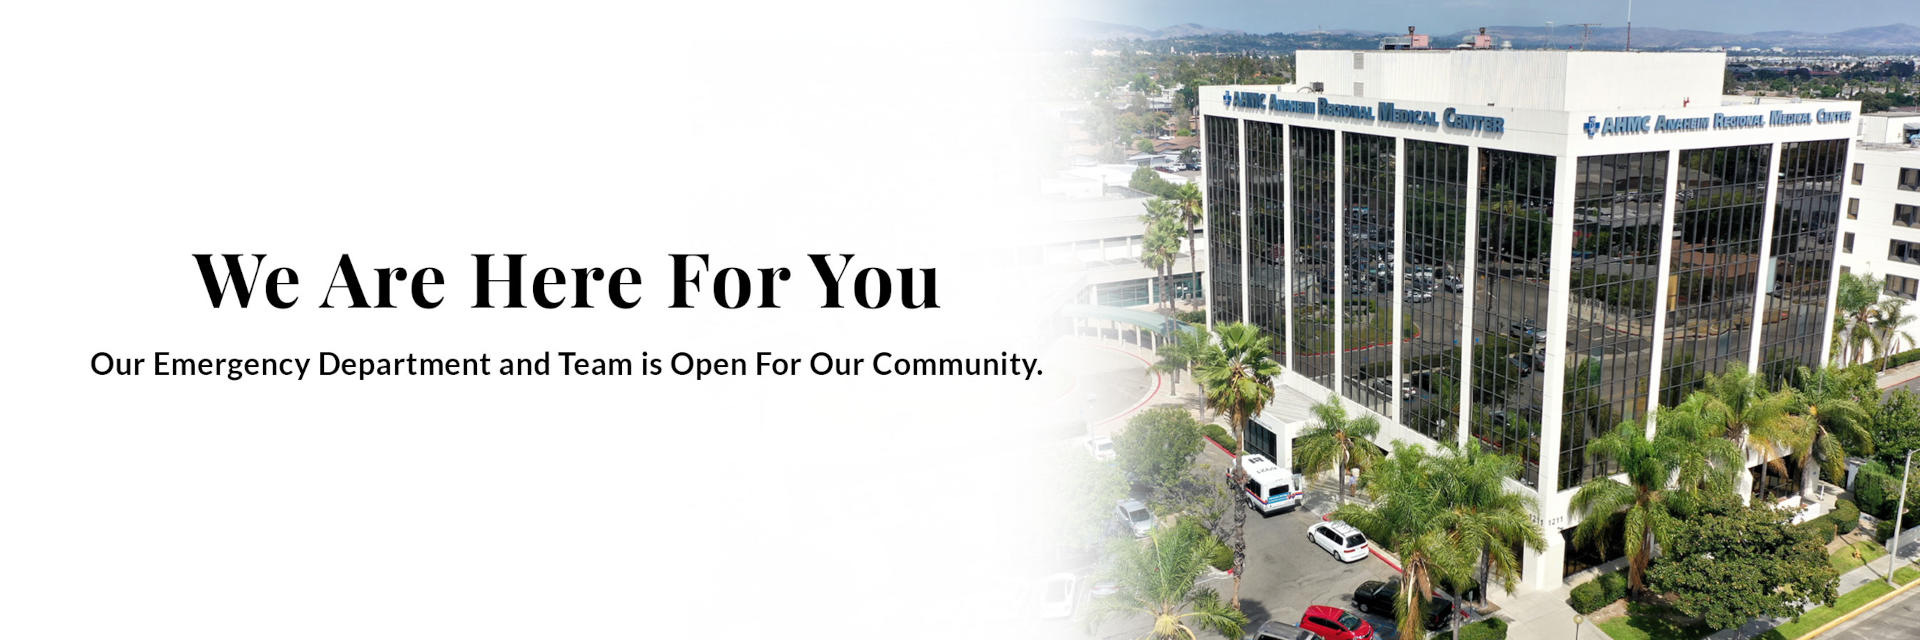 Banner picture sky view of Anaheim Regional Medical Center. Banner says:

We Are Here For You
Our Emergency Department and Team is Open For Our Community.